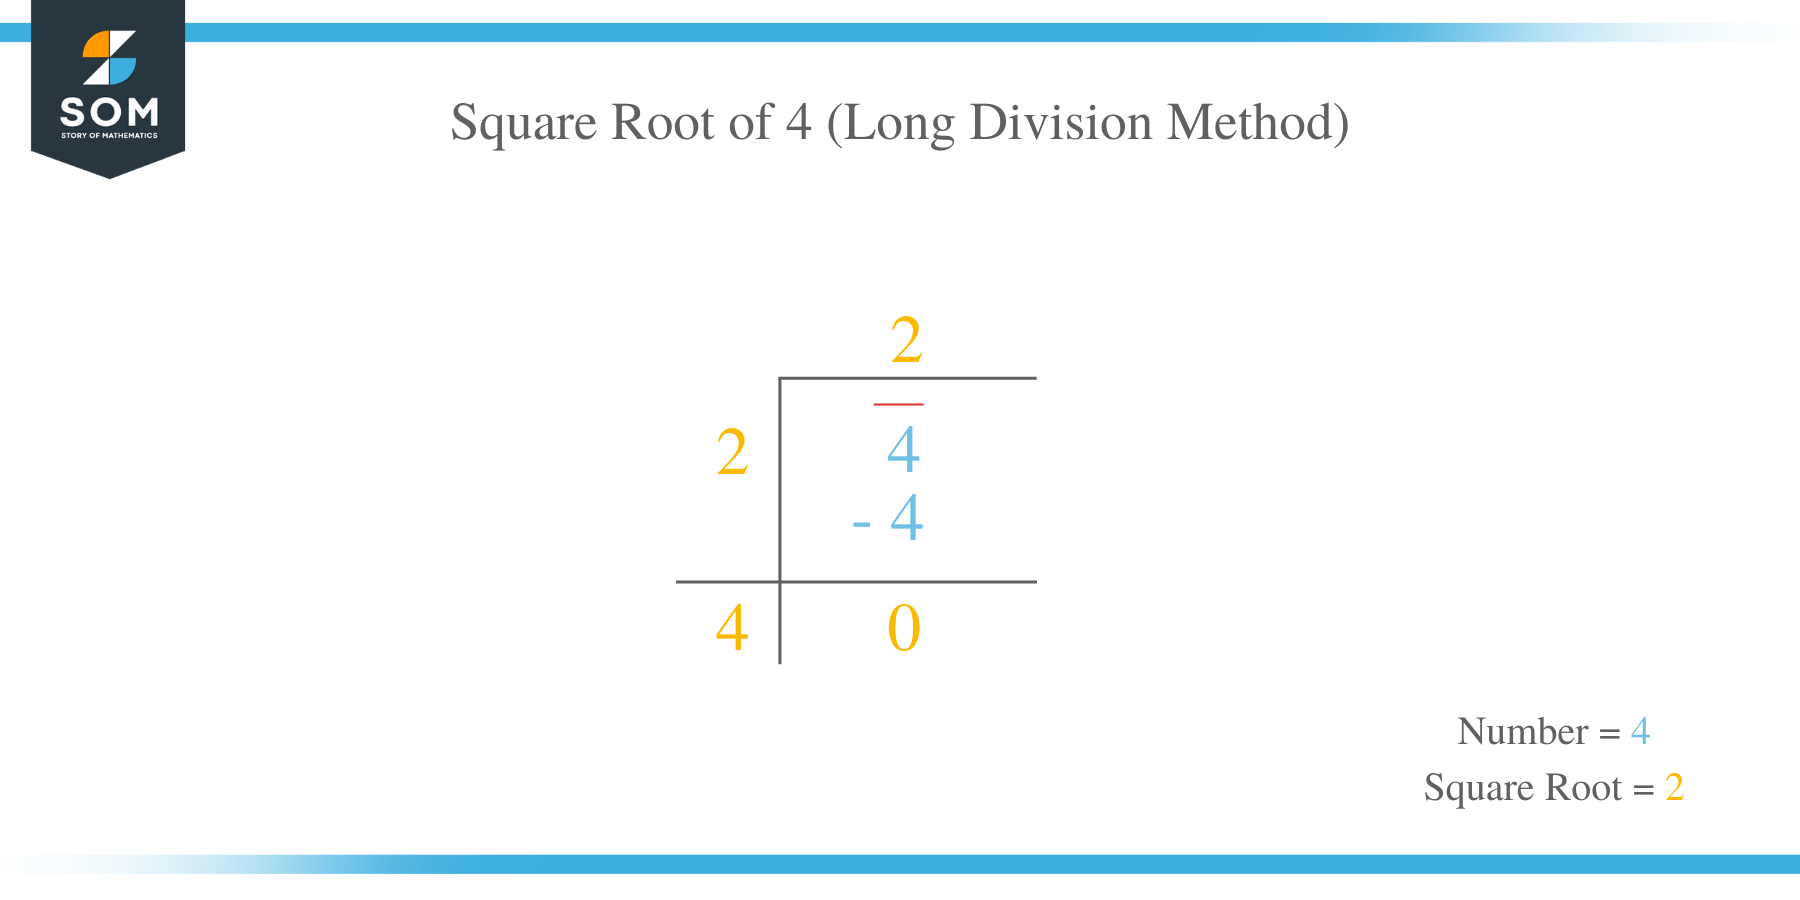 Square Root of 4 by Long Division Method